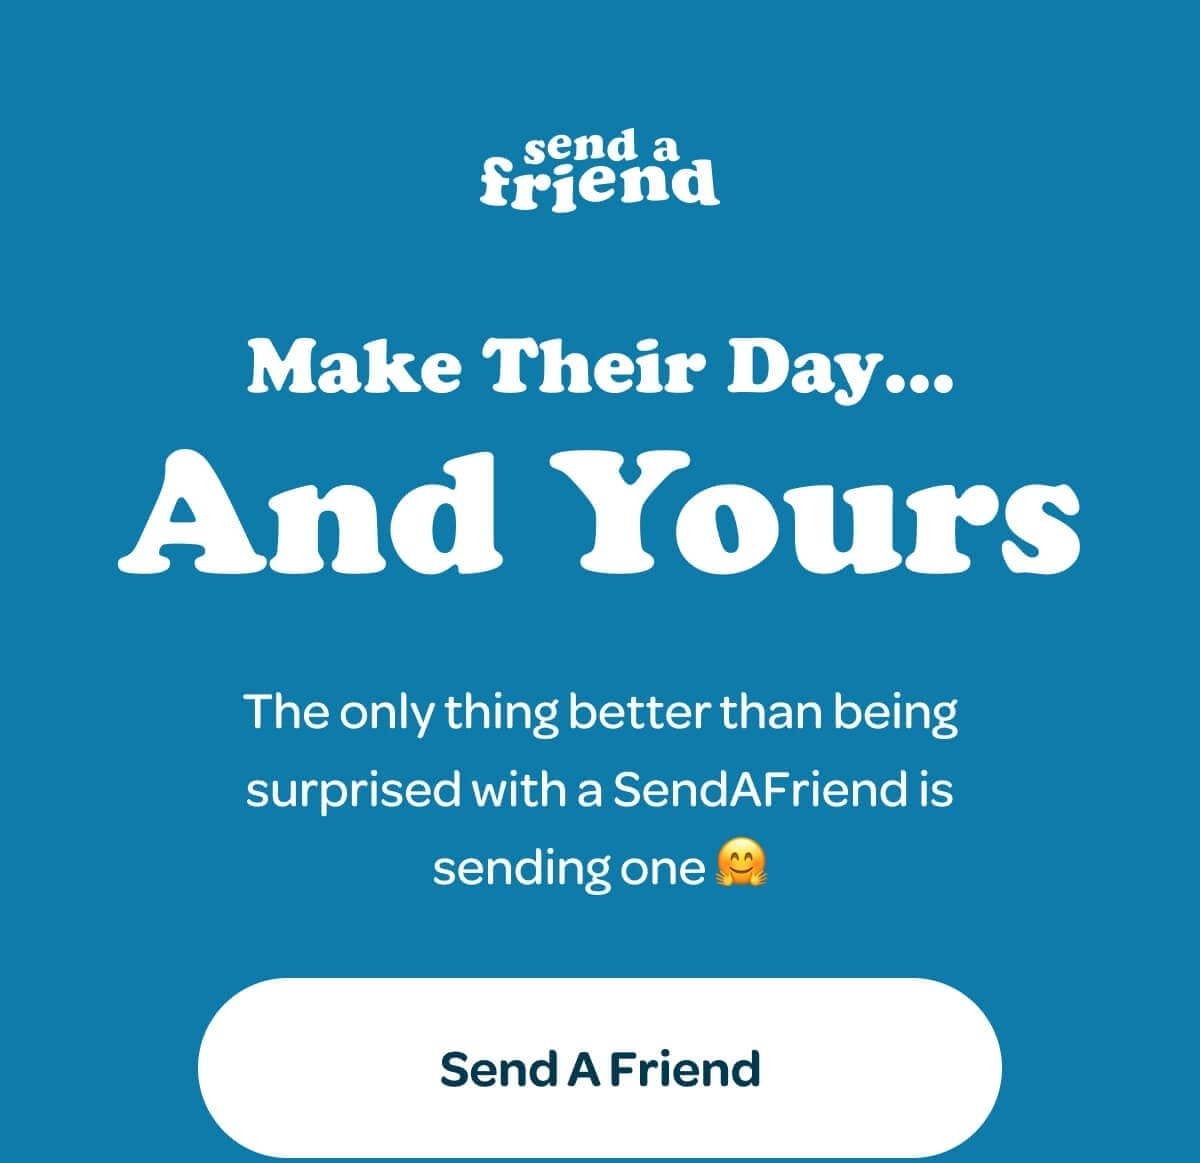 Make their day... and yours. The only thing better than being surprised with a SendAFriend is sending one 🤗 [SendAFriend]